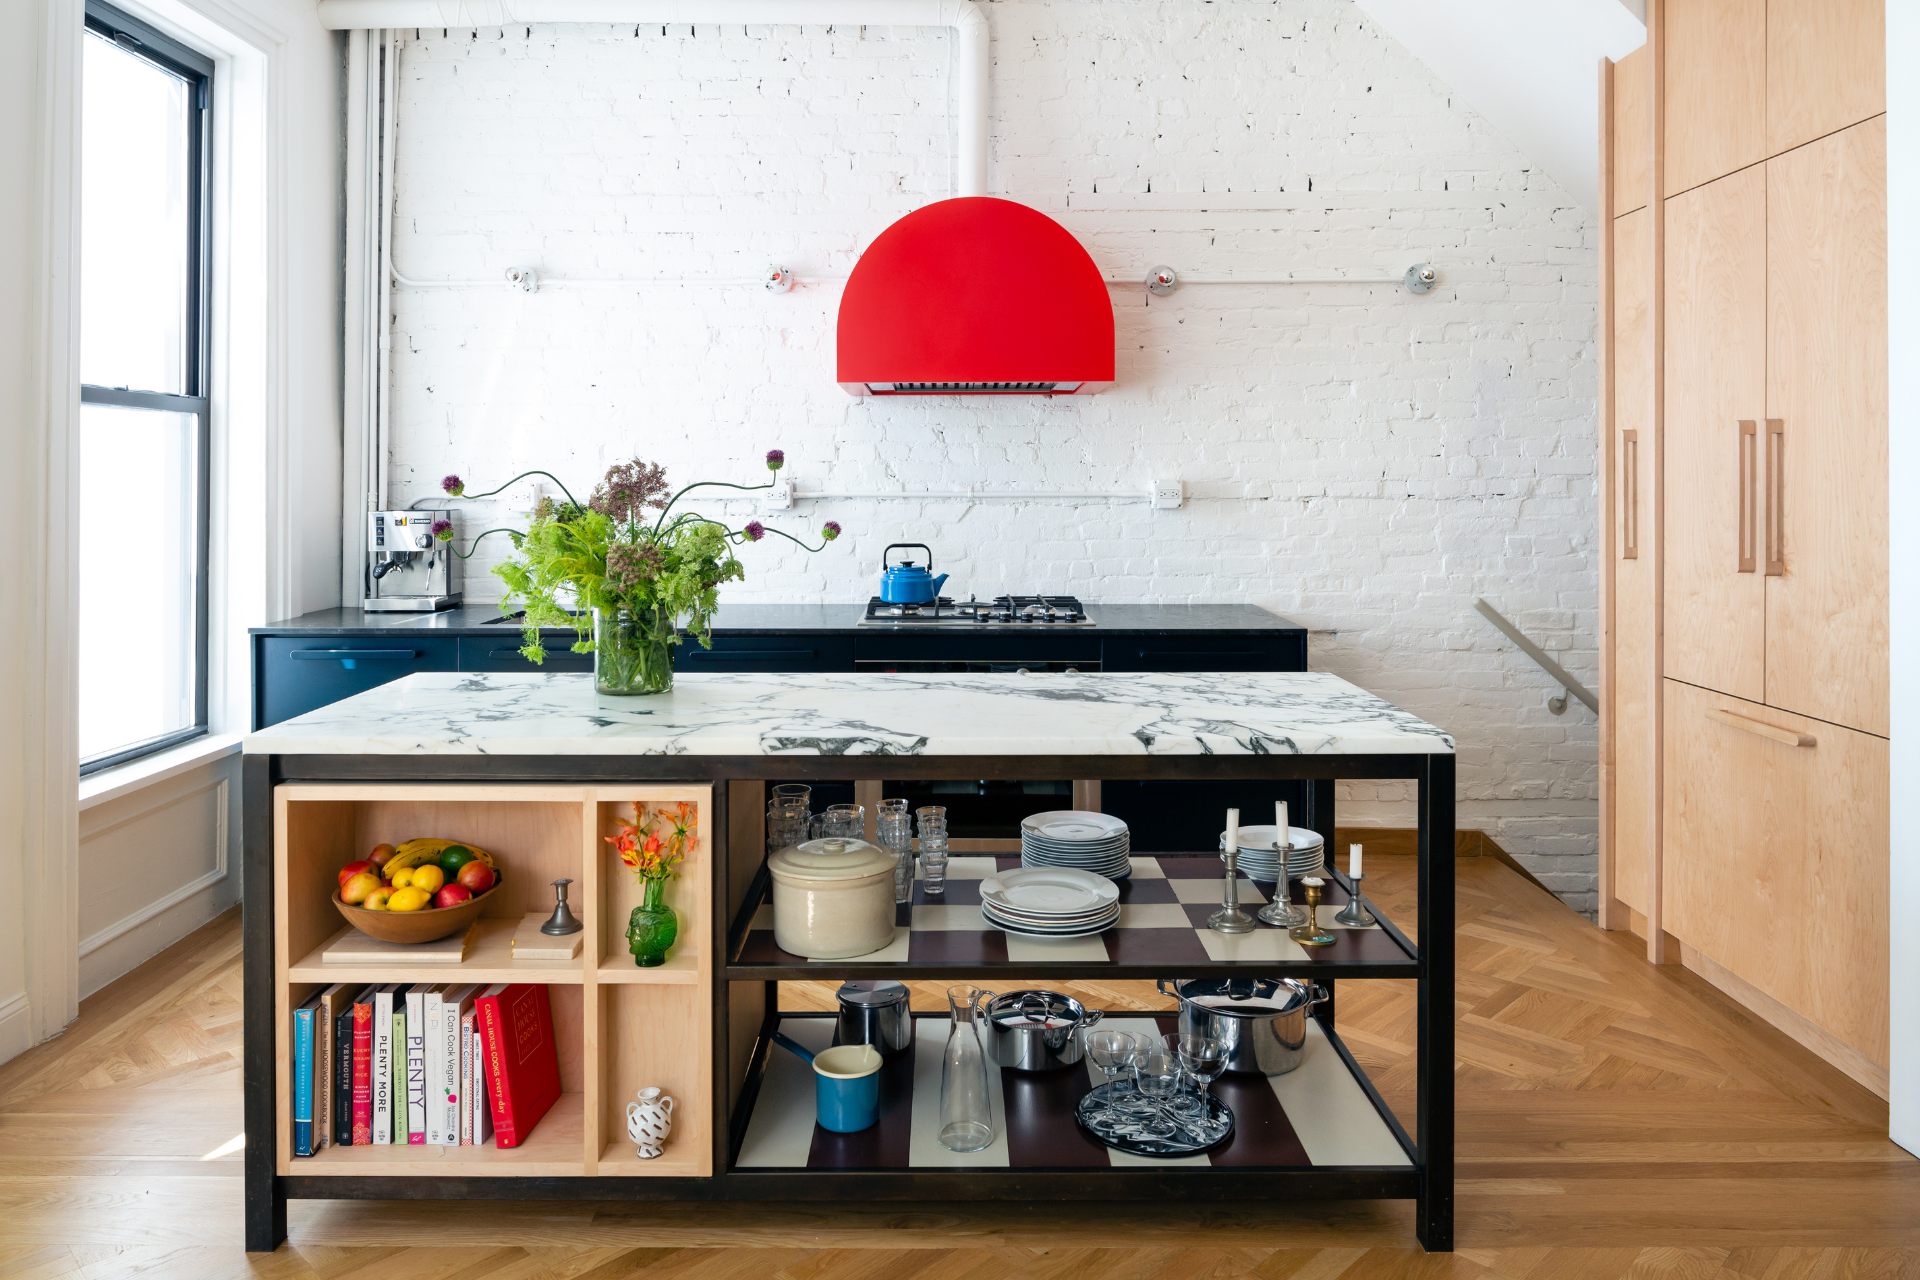 15 Small Kitchen Ideas To Inspire You